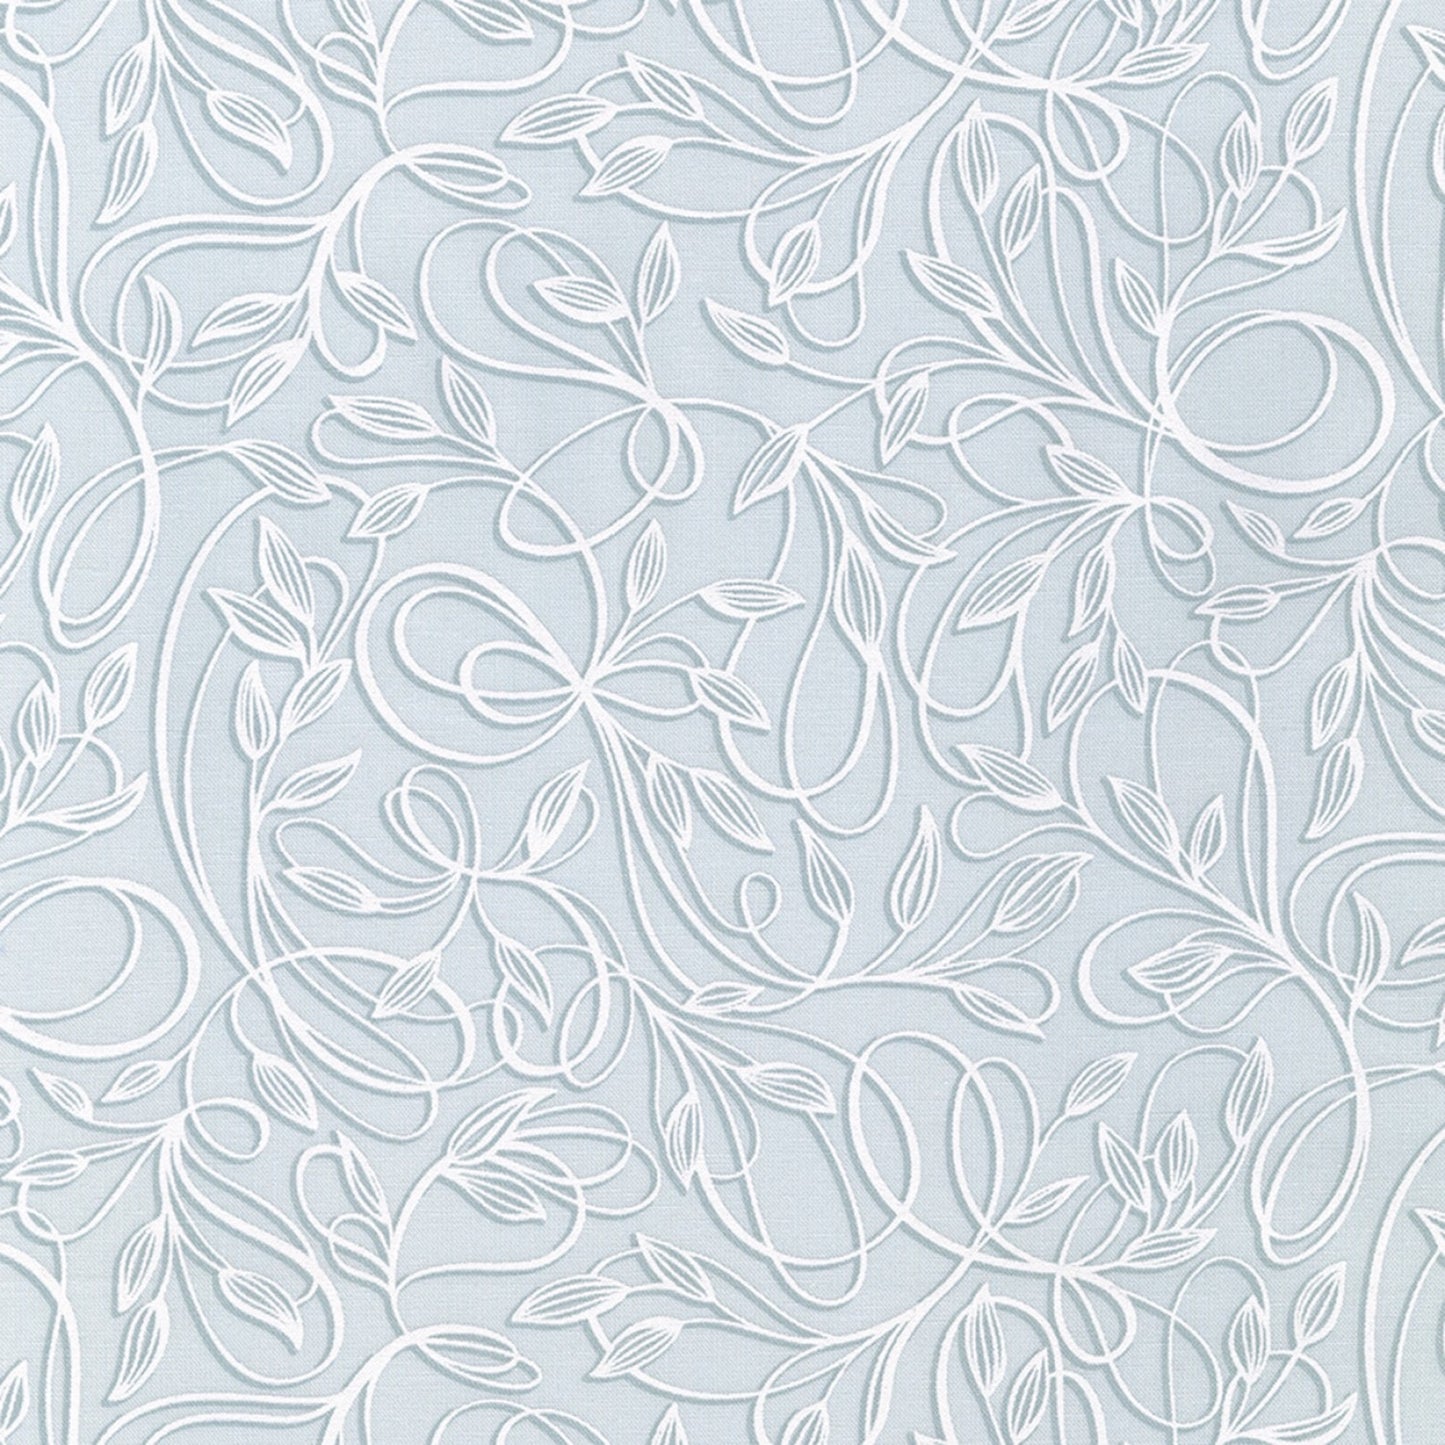 Wishwell Alabaster- Mist Leaves: Sold by the 1/2 yard.